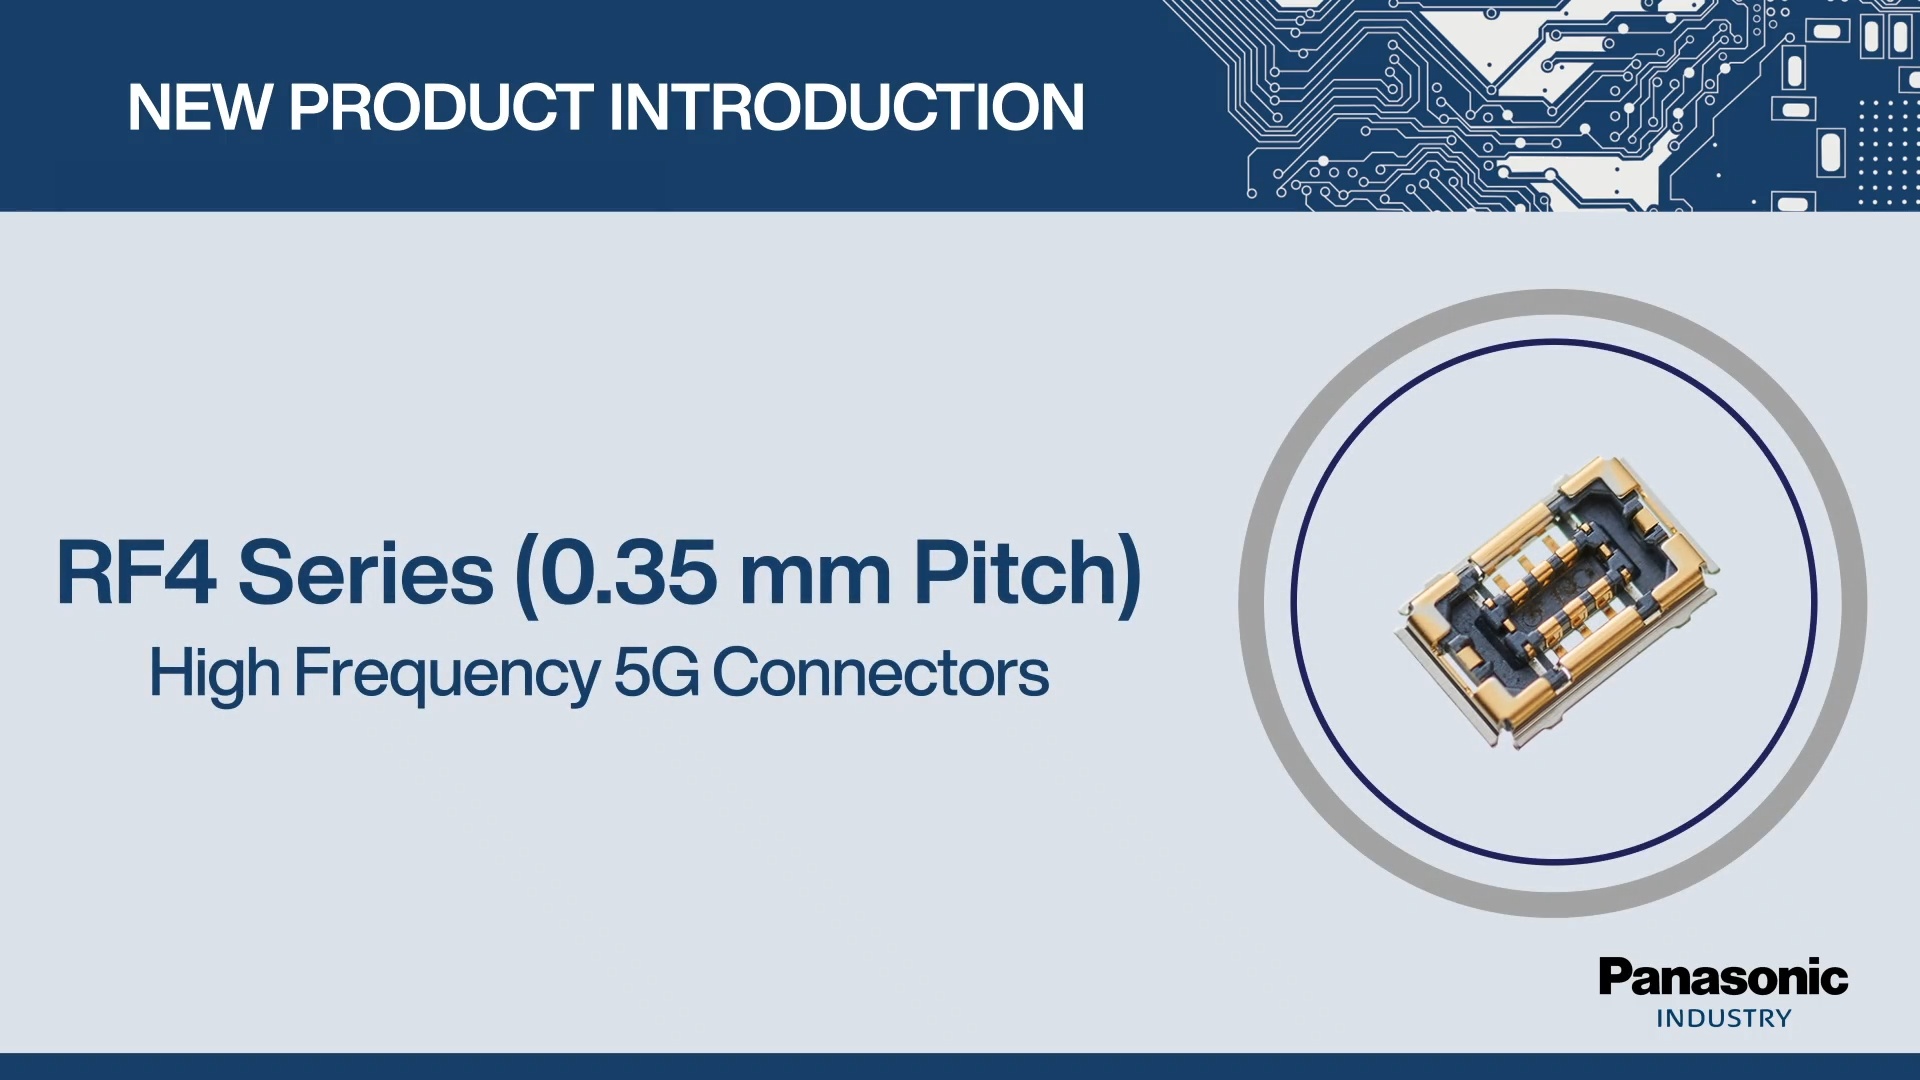 New Product Introduction: RF4 Series